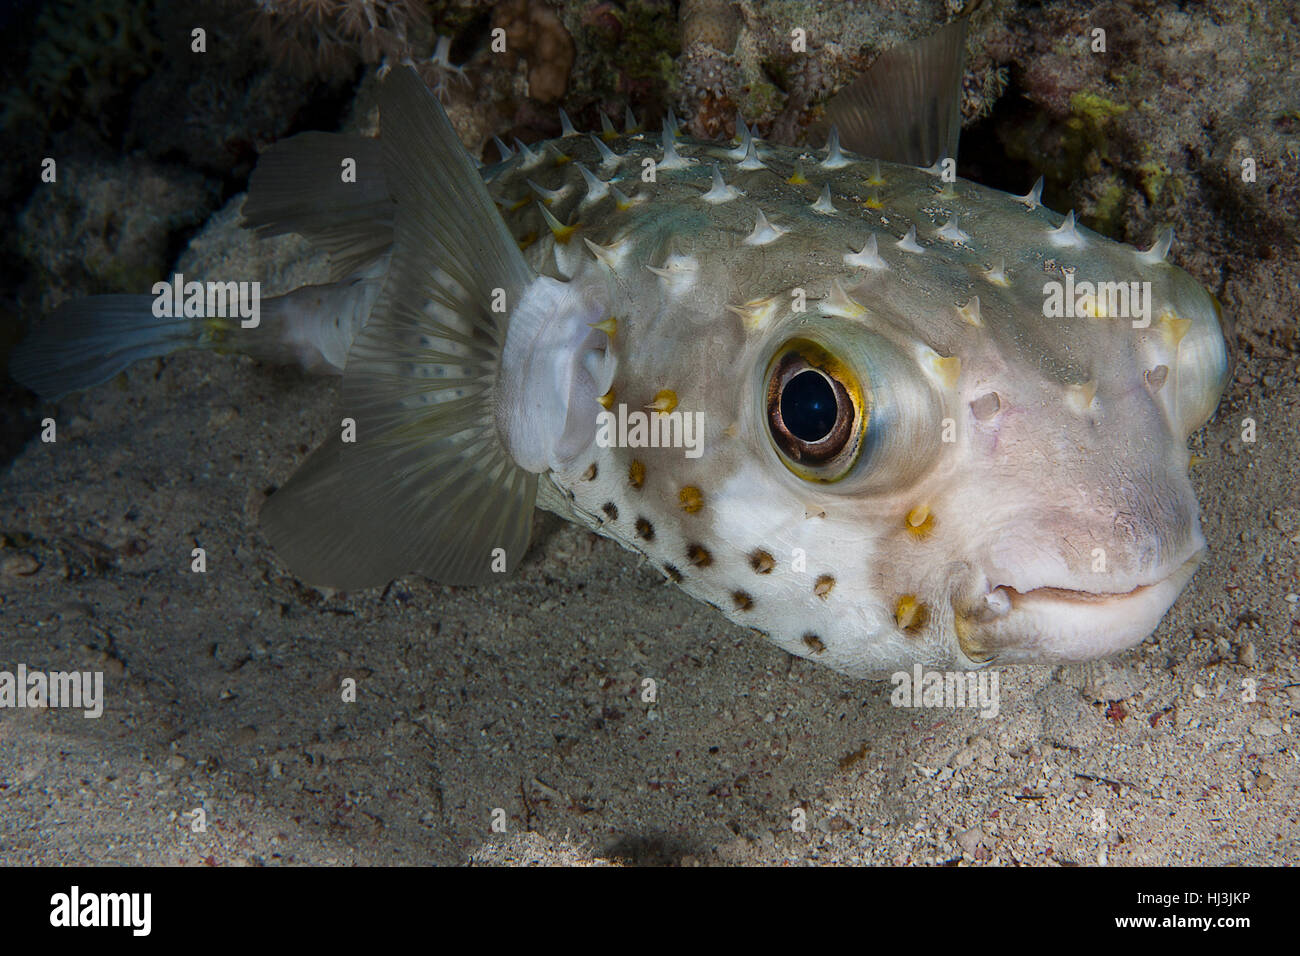 Underwater close-up portrait of the yellowspotted burrfish (Cyclichtys spilostylus) Stock Photo